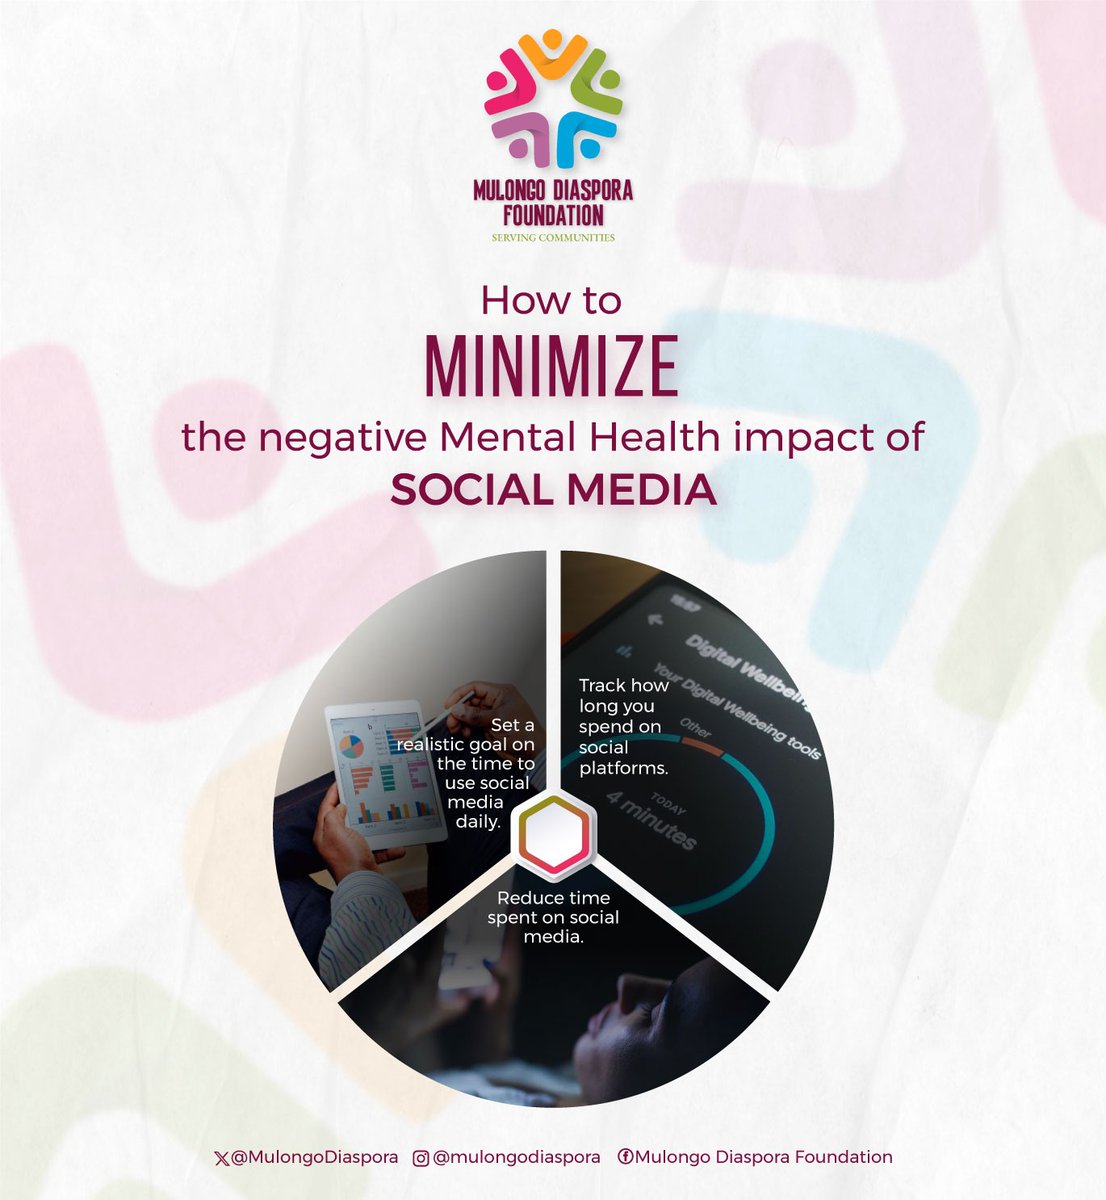 Social media has several adverse effects on one's mental health. However, these effects can be minimized by following these strategies.
#Servingcommunities 
#HealthySocialMediaUse